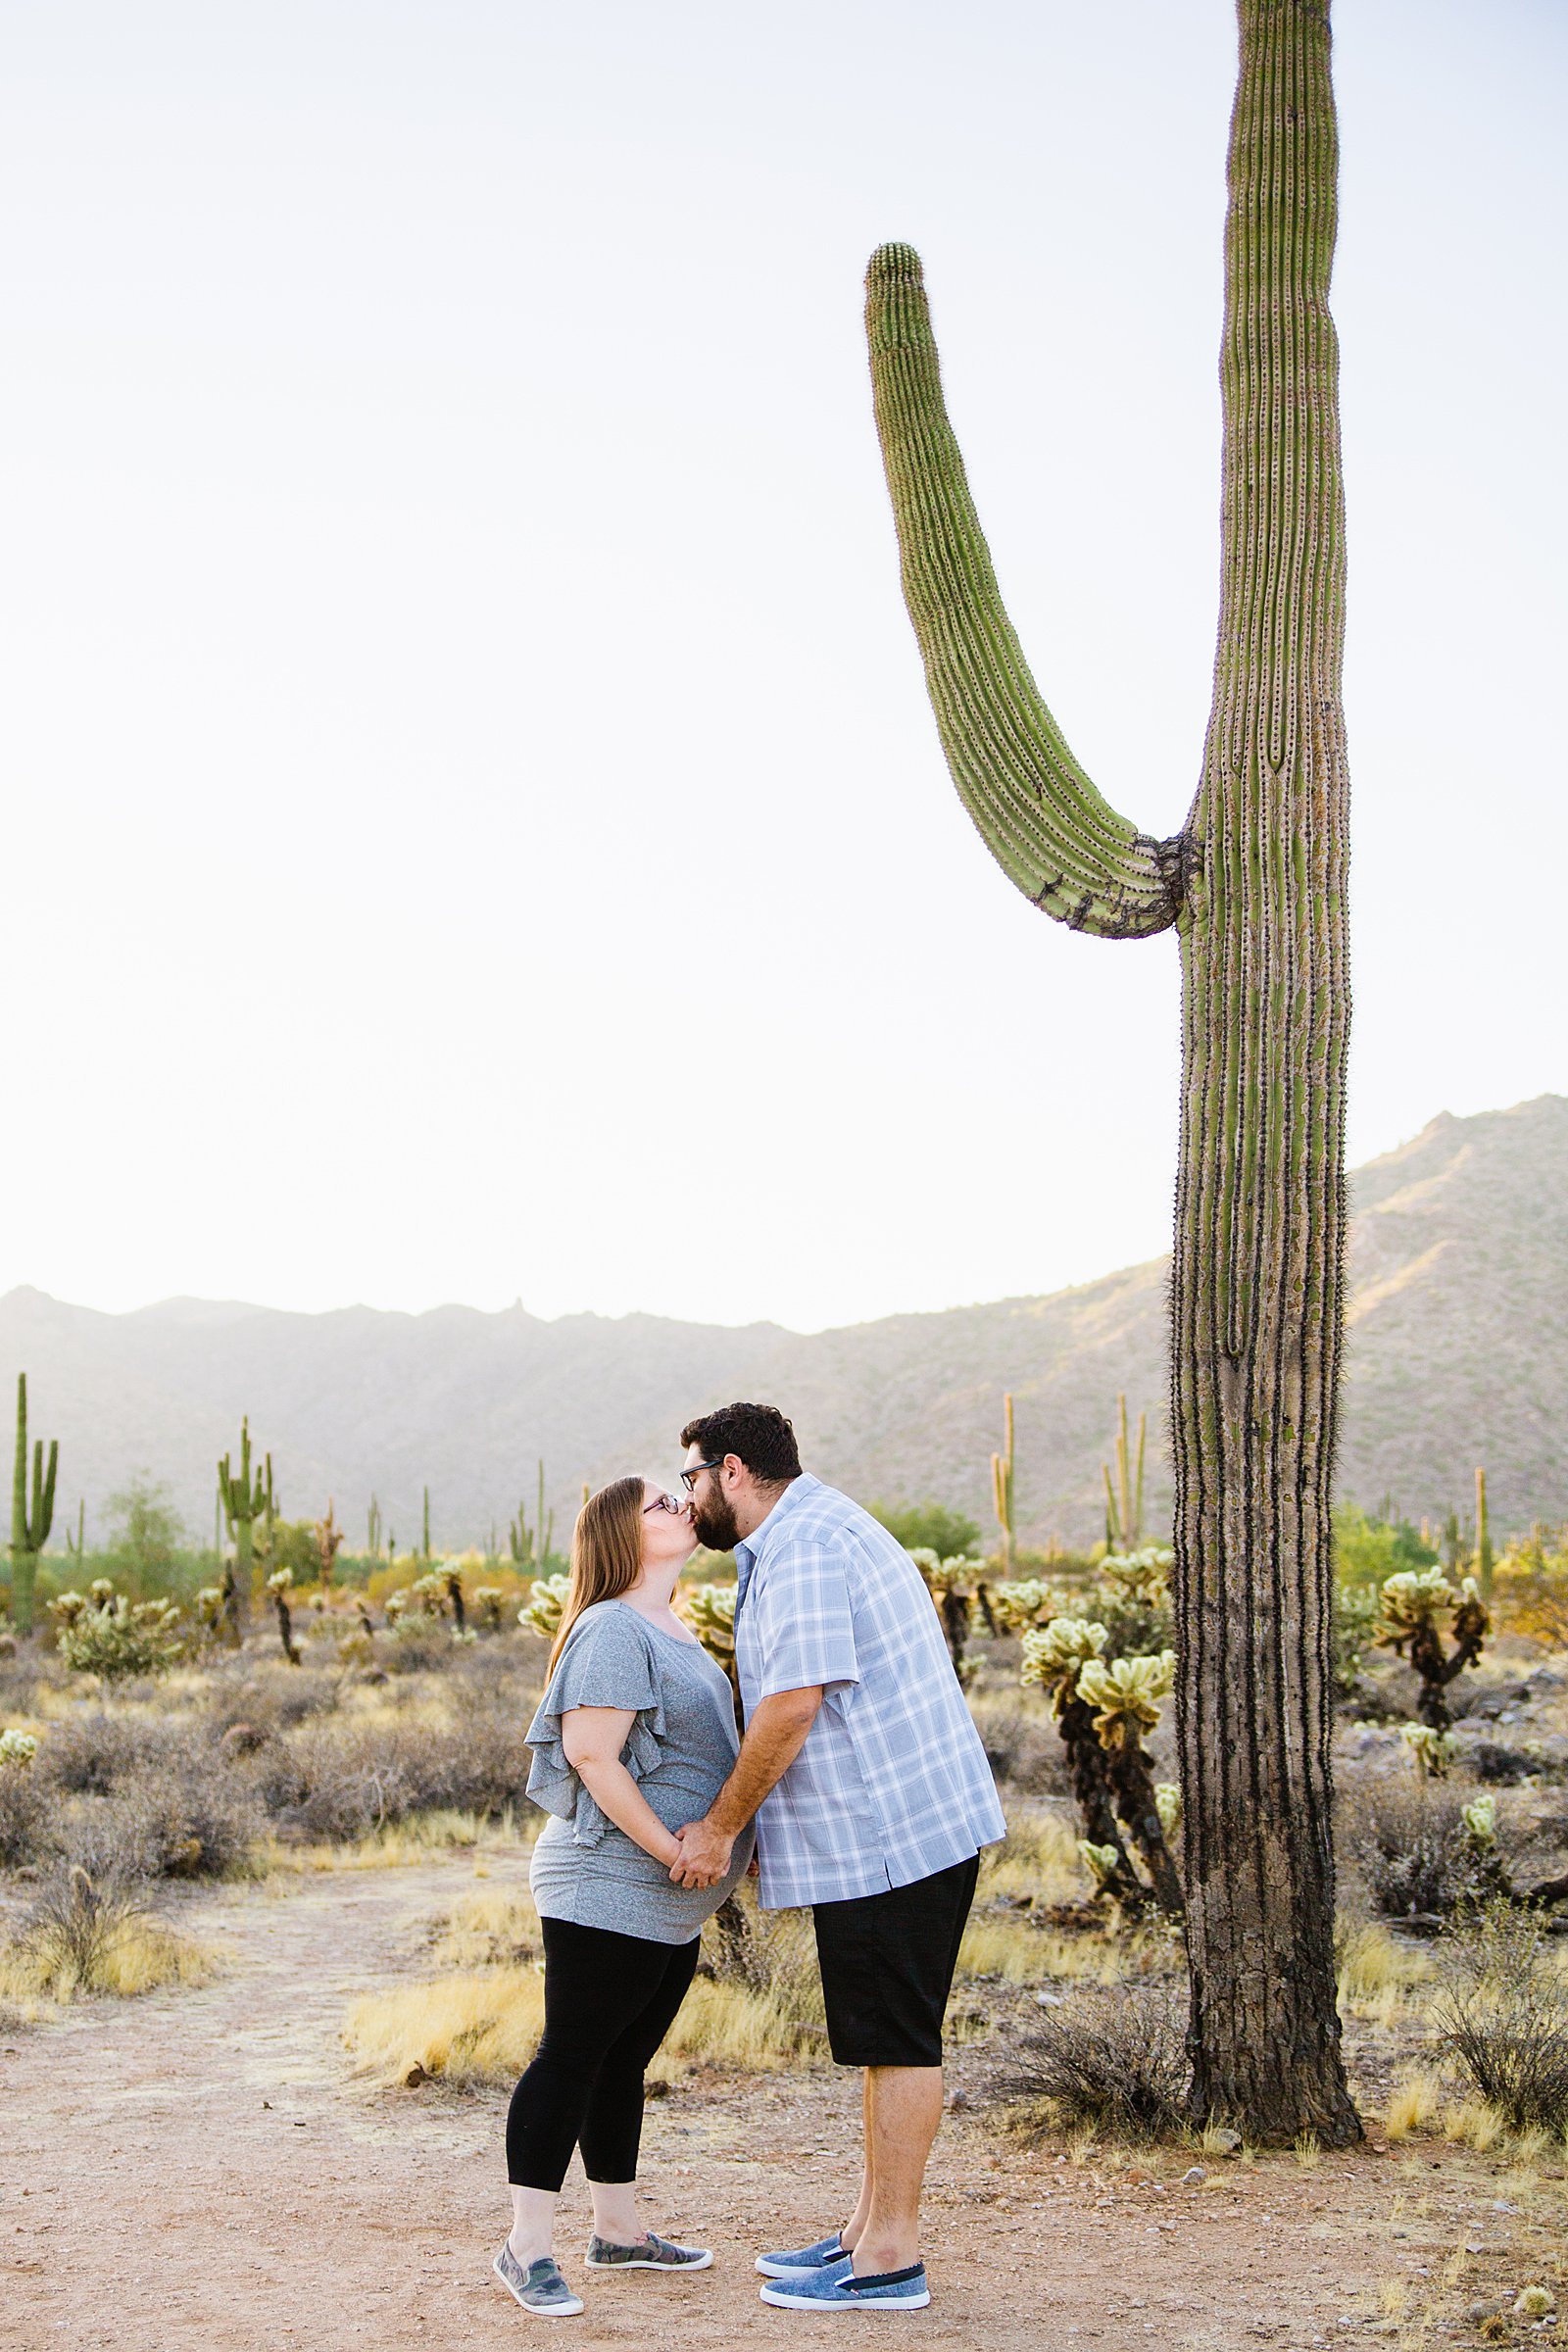 Couple kiss during their maternity session at the White Tanks by Phoenix maternity photographer PMA Photography.